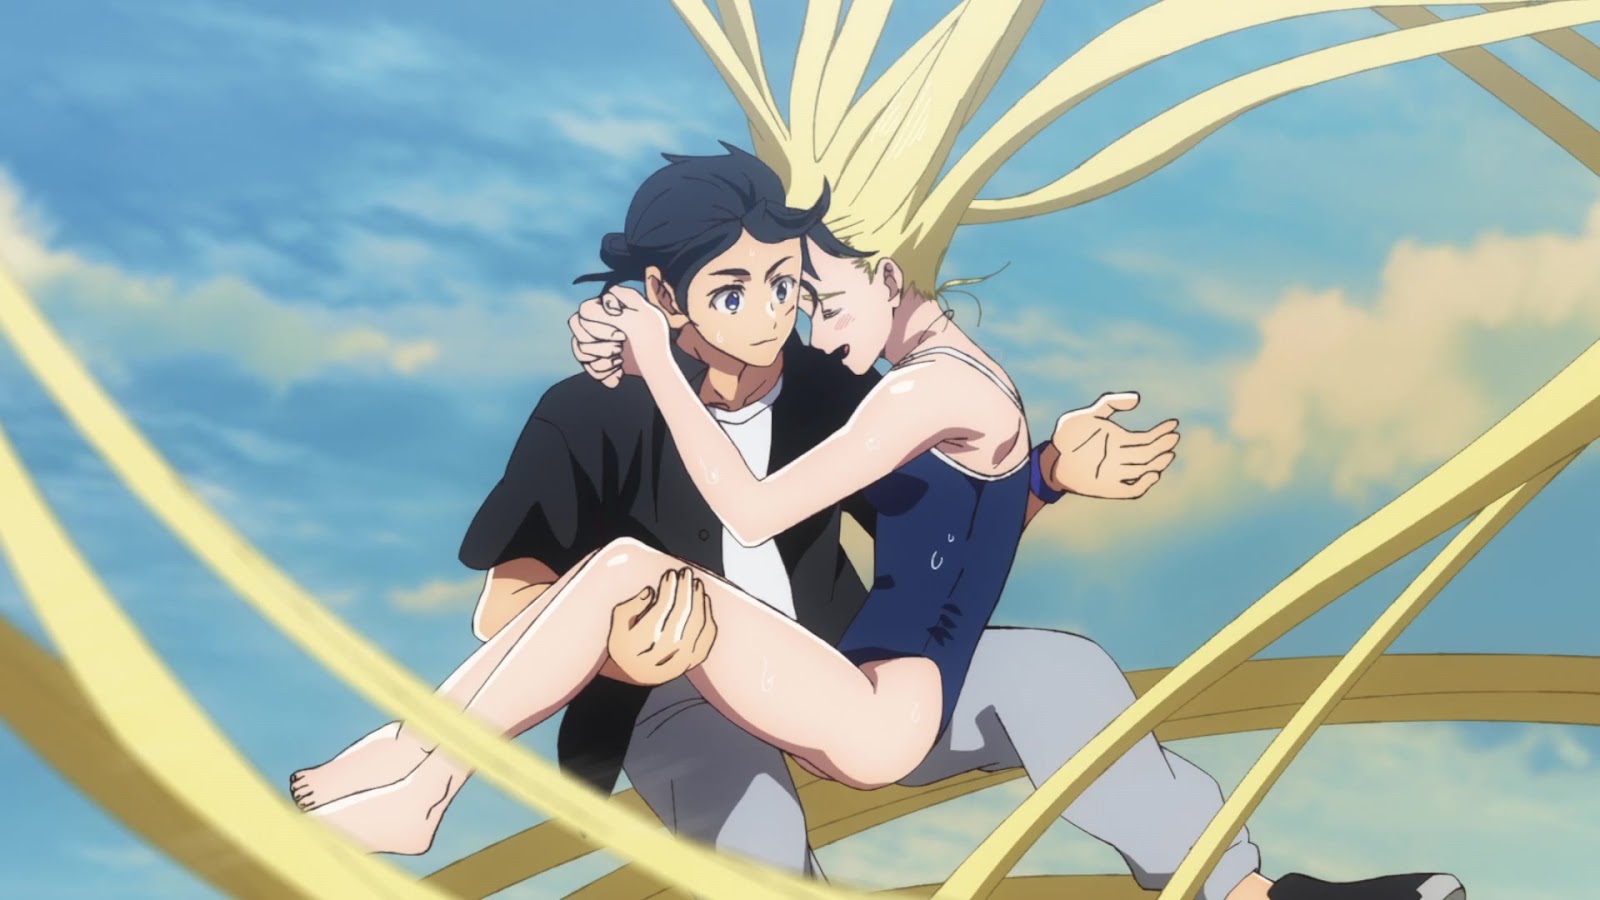 Summer Time Rendering - Review - Anime News Network